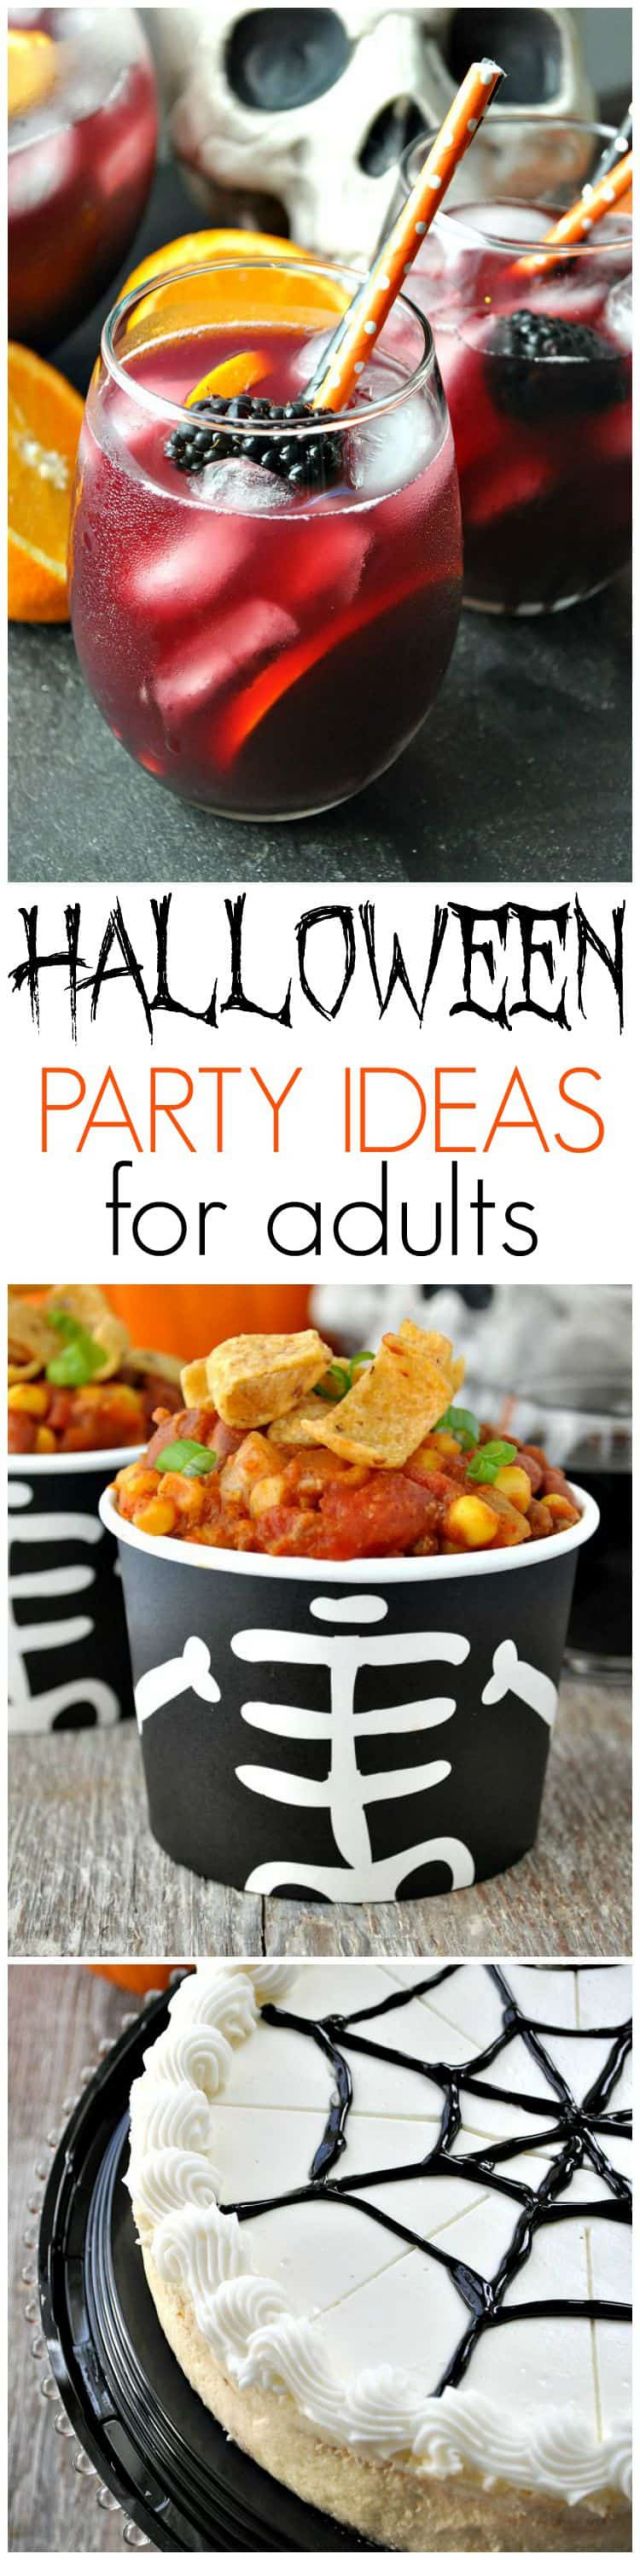 Fun Halloween Party Ideas For Adults
 Slow Cooker Pumpkin Chili Halloween Party Ideas for